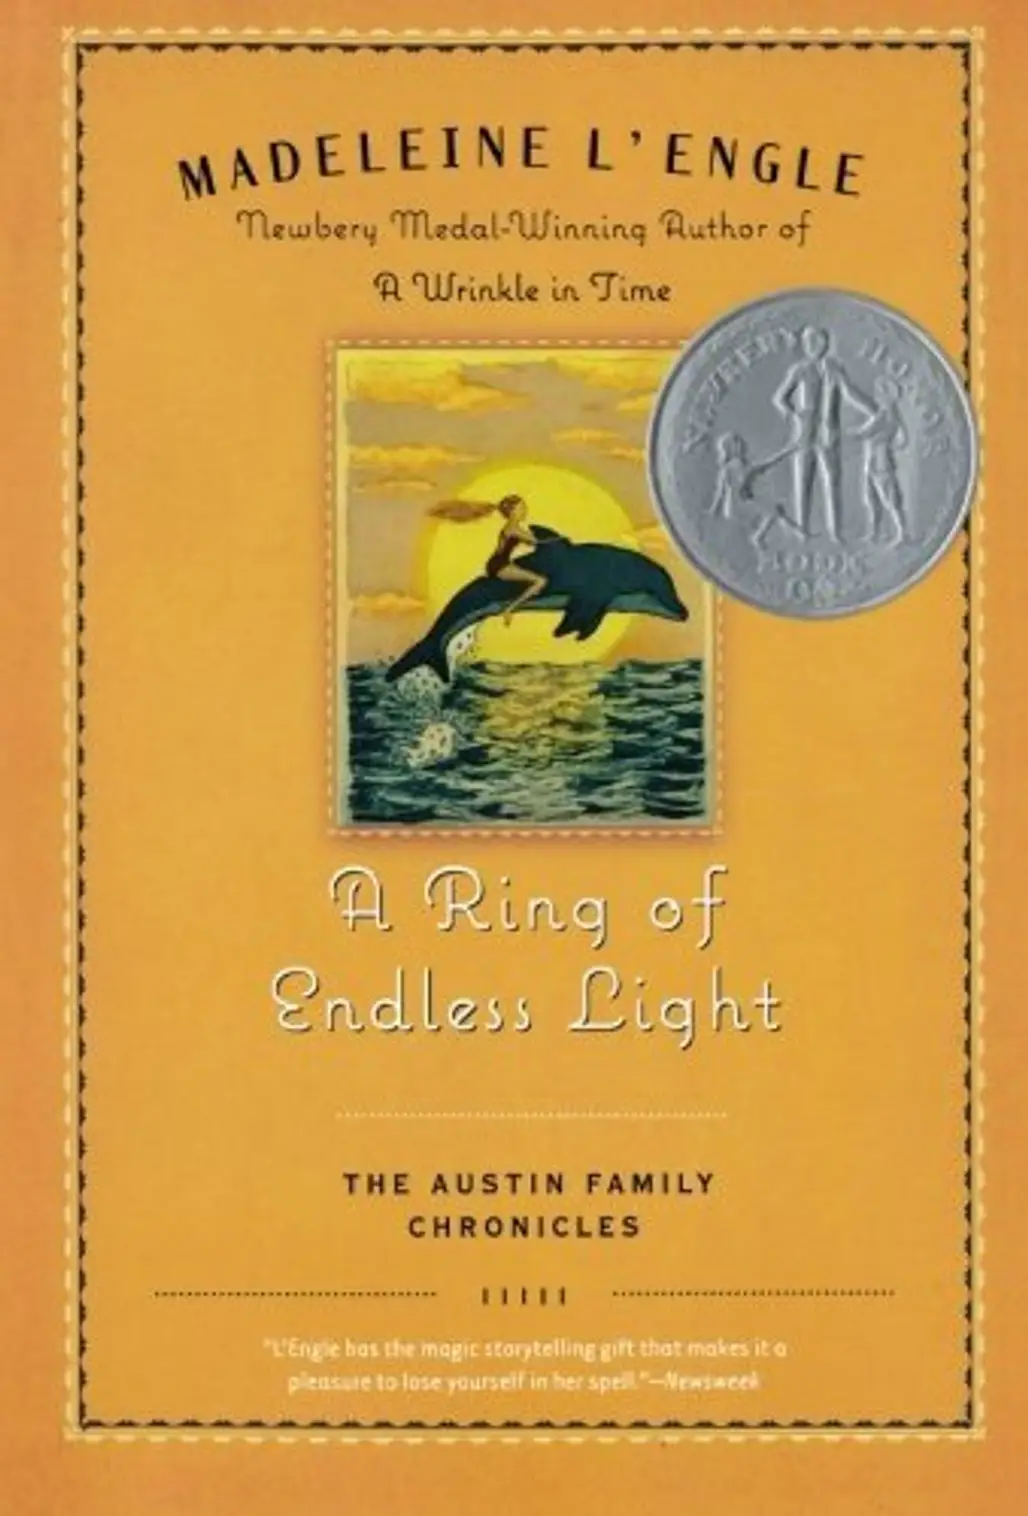 A Ring of Endless Light by Madeleine L’Engle